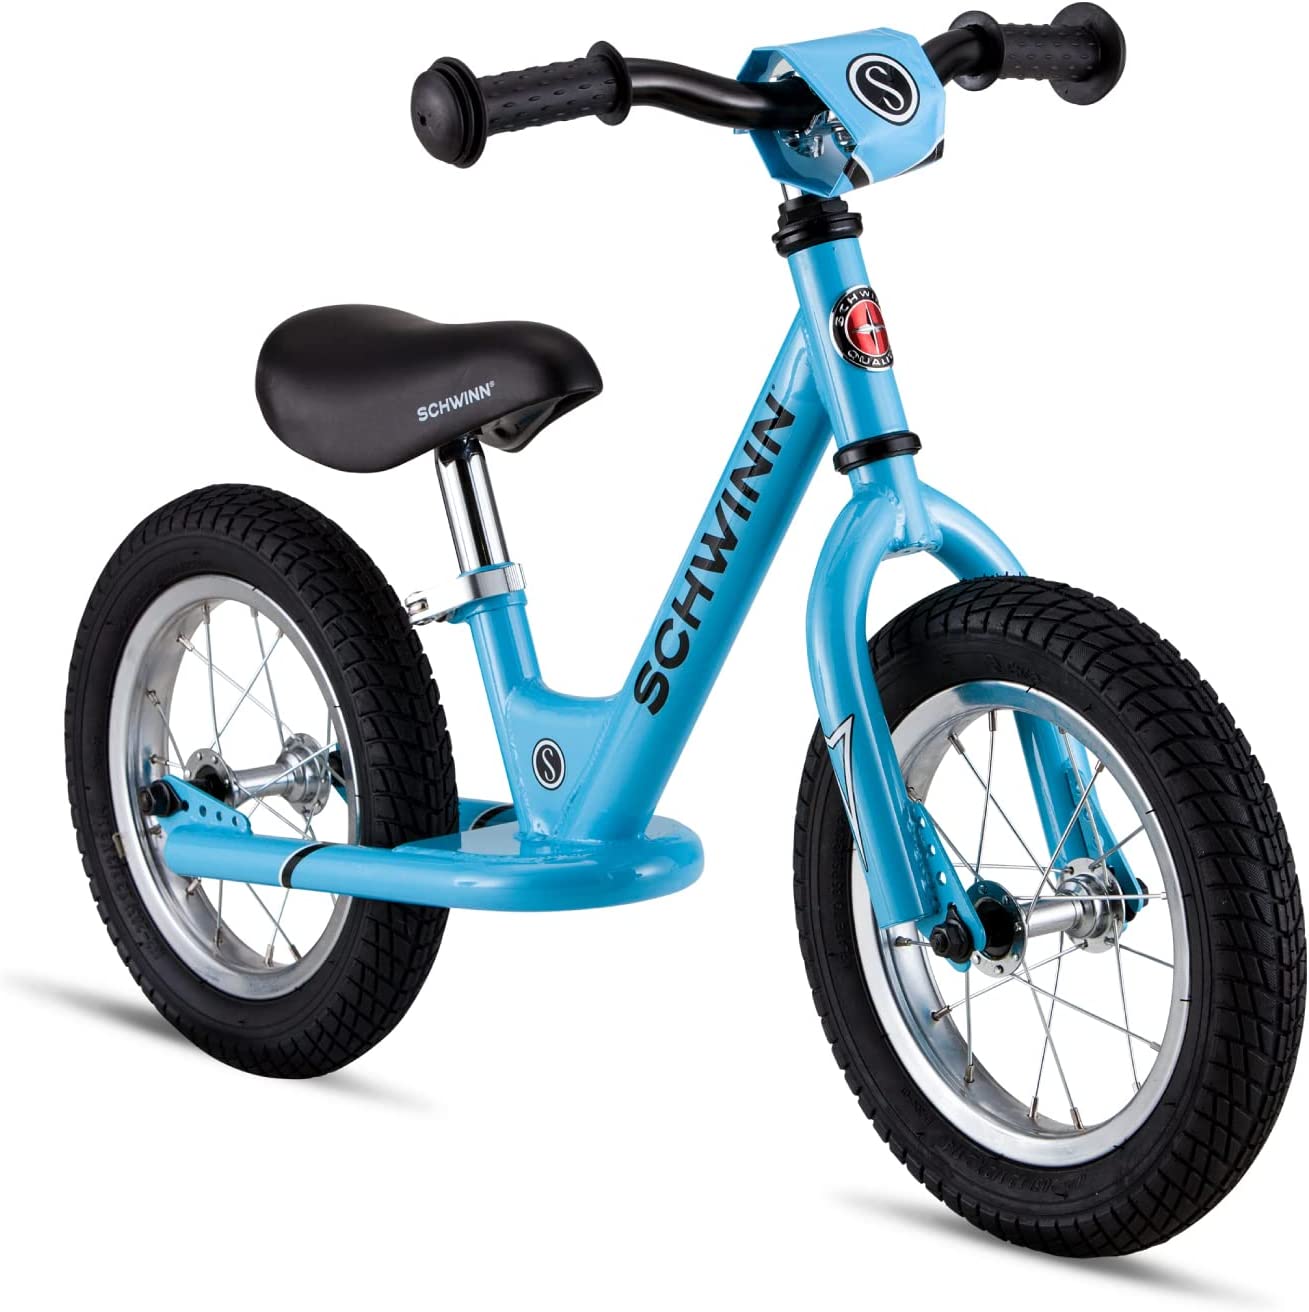 Schwinn Balance Toddler Bike, For Kids Boys and Girls, Fit 28 to 38-Inches Tall, Beginner Rider Training, 12-Inch Wheels, Foot-to-Floor Frame Design